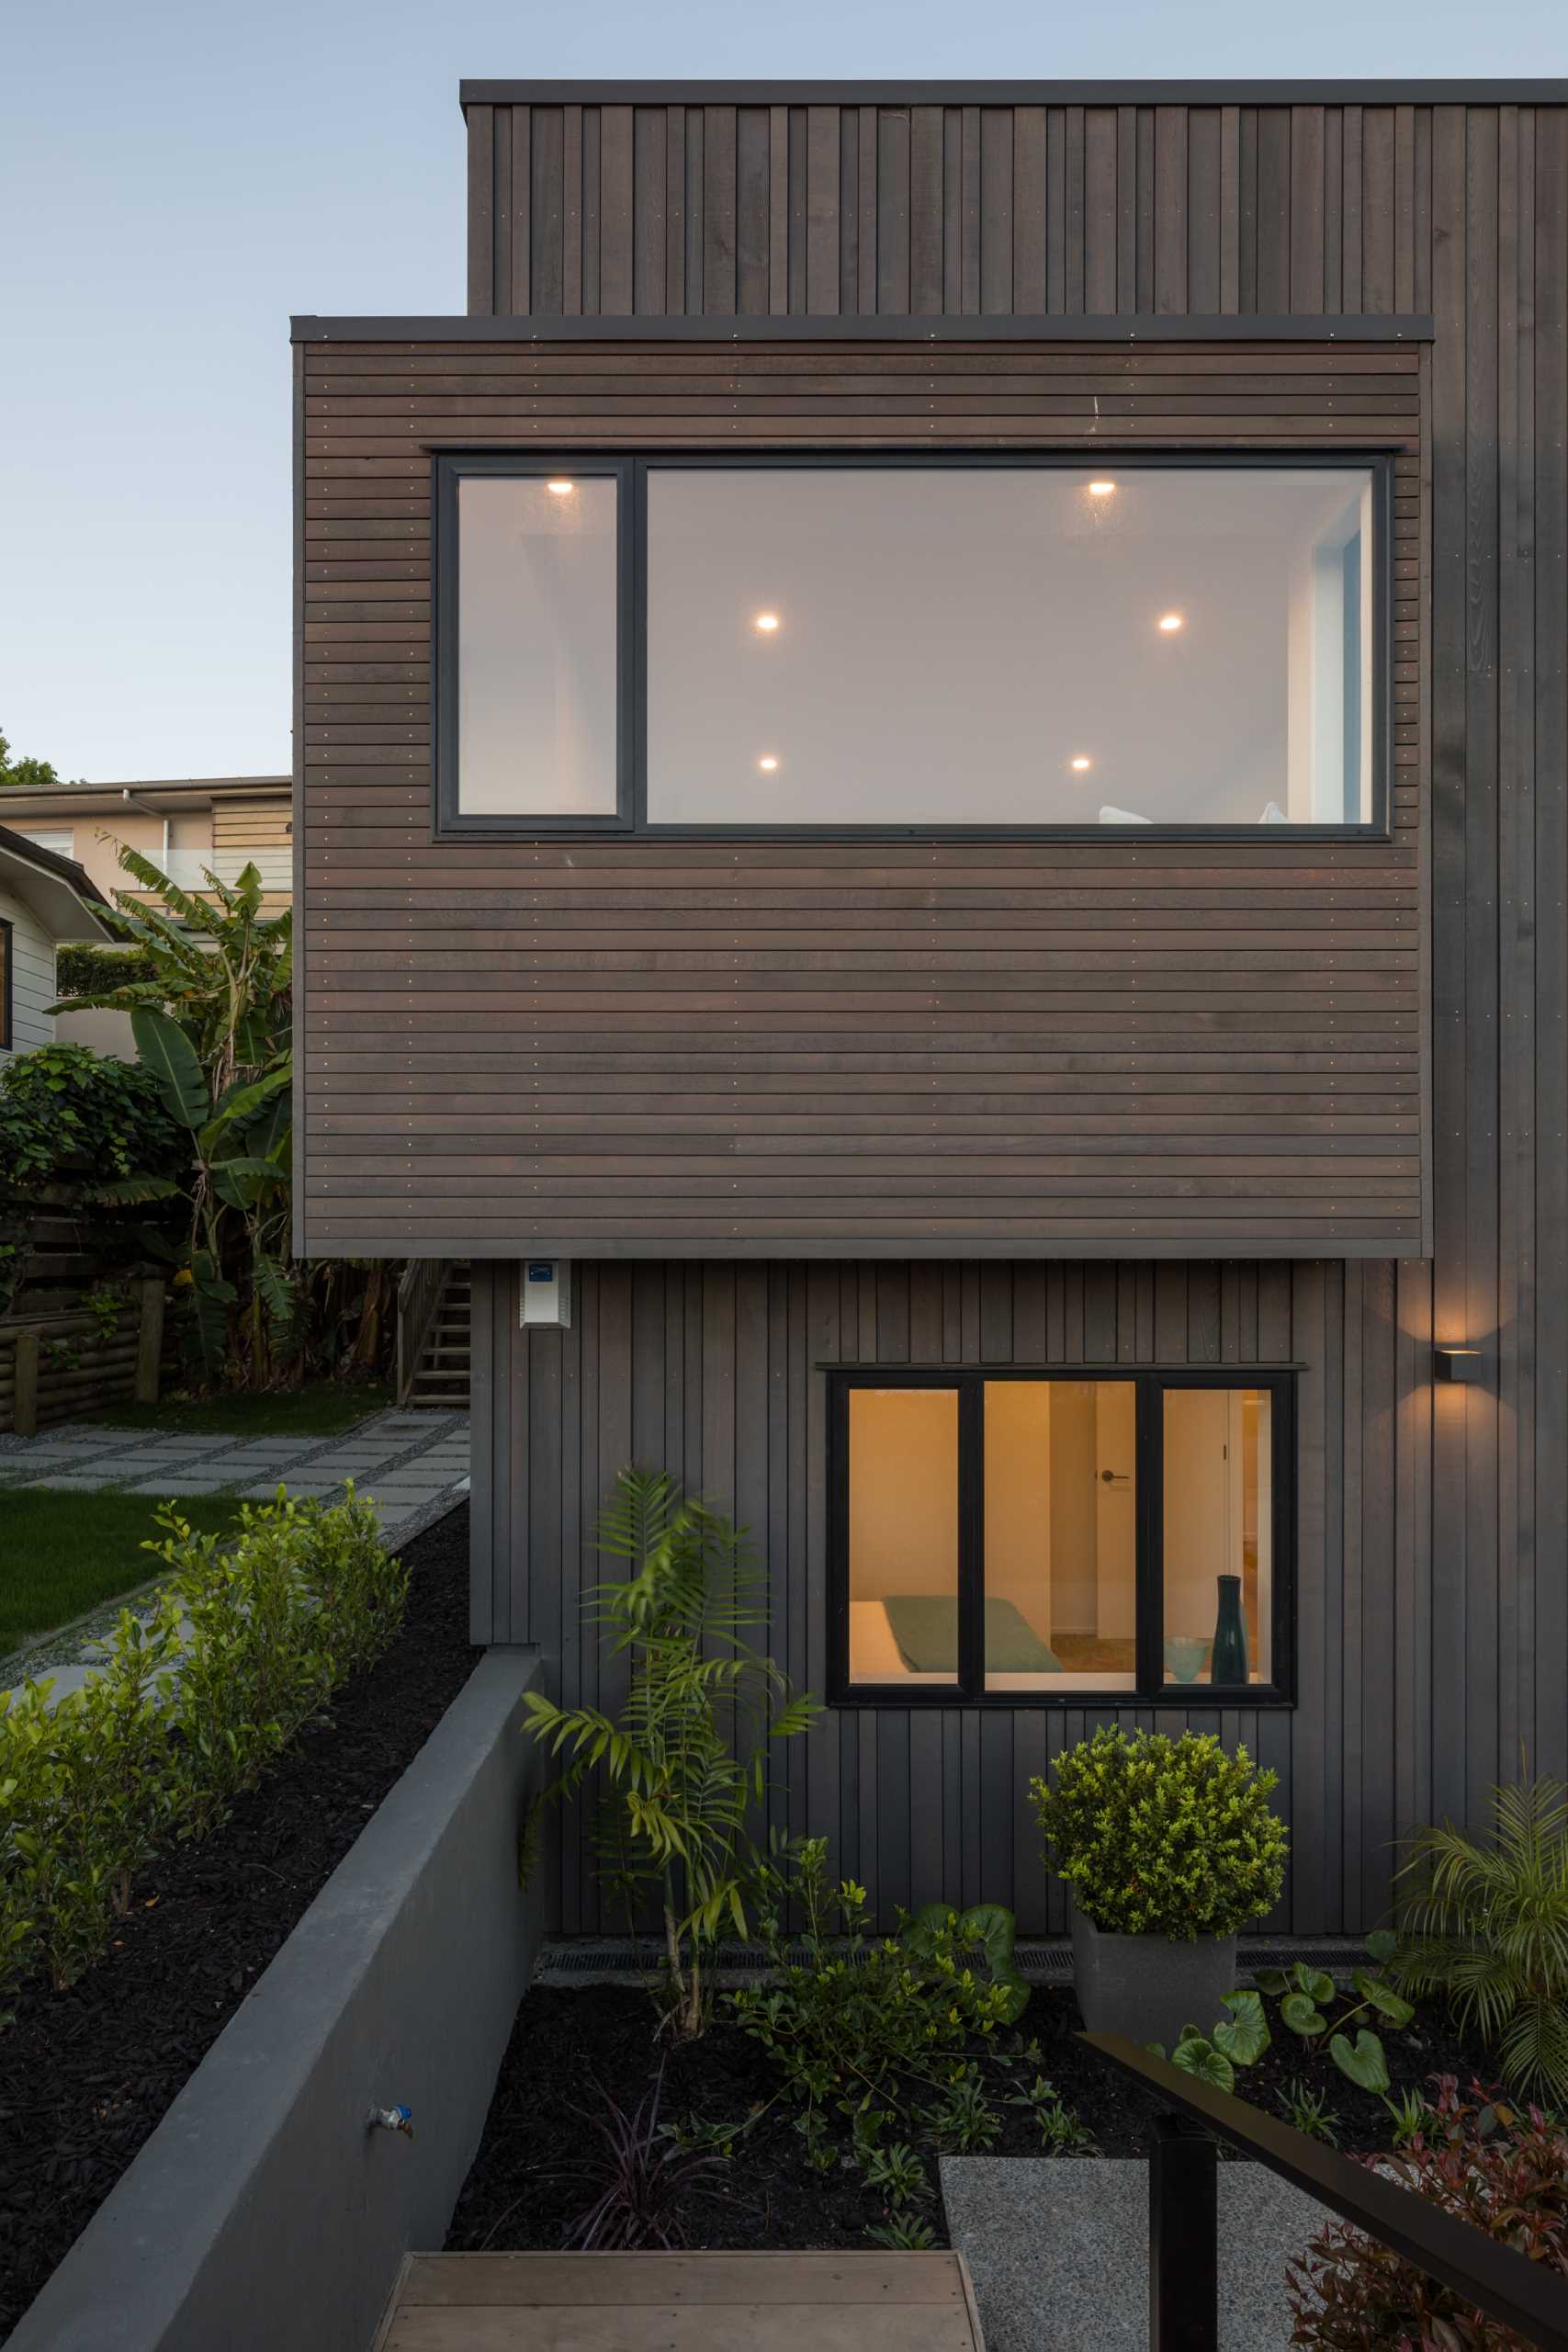 The exterior of this renovated home, which is clad in dark wood in both horizontal and vertical directions, also features black window frames.